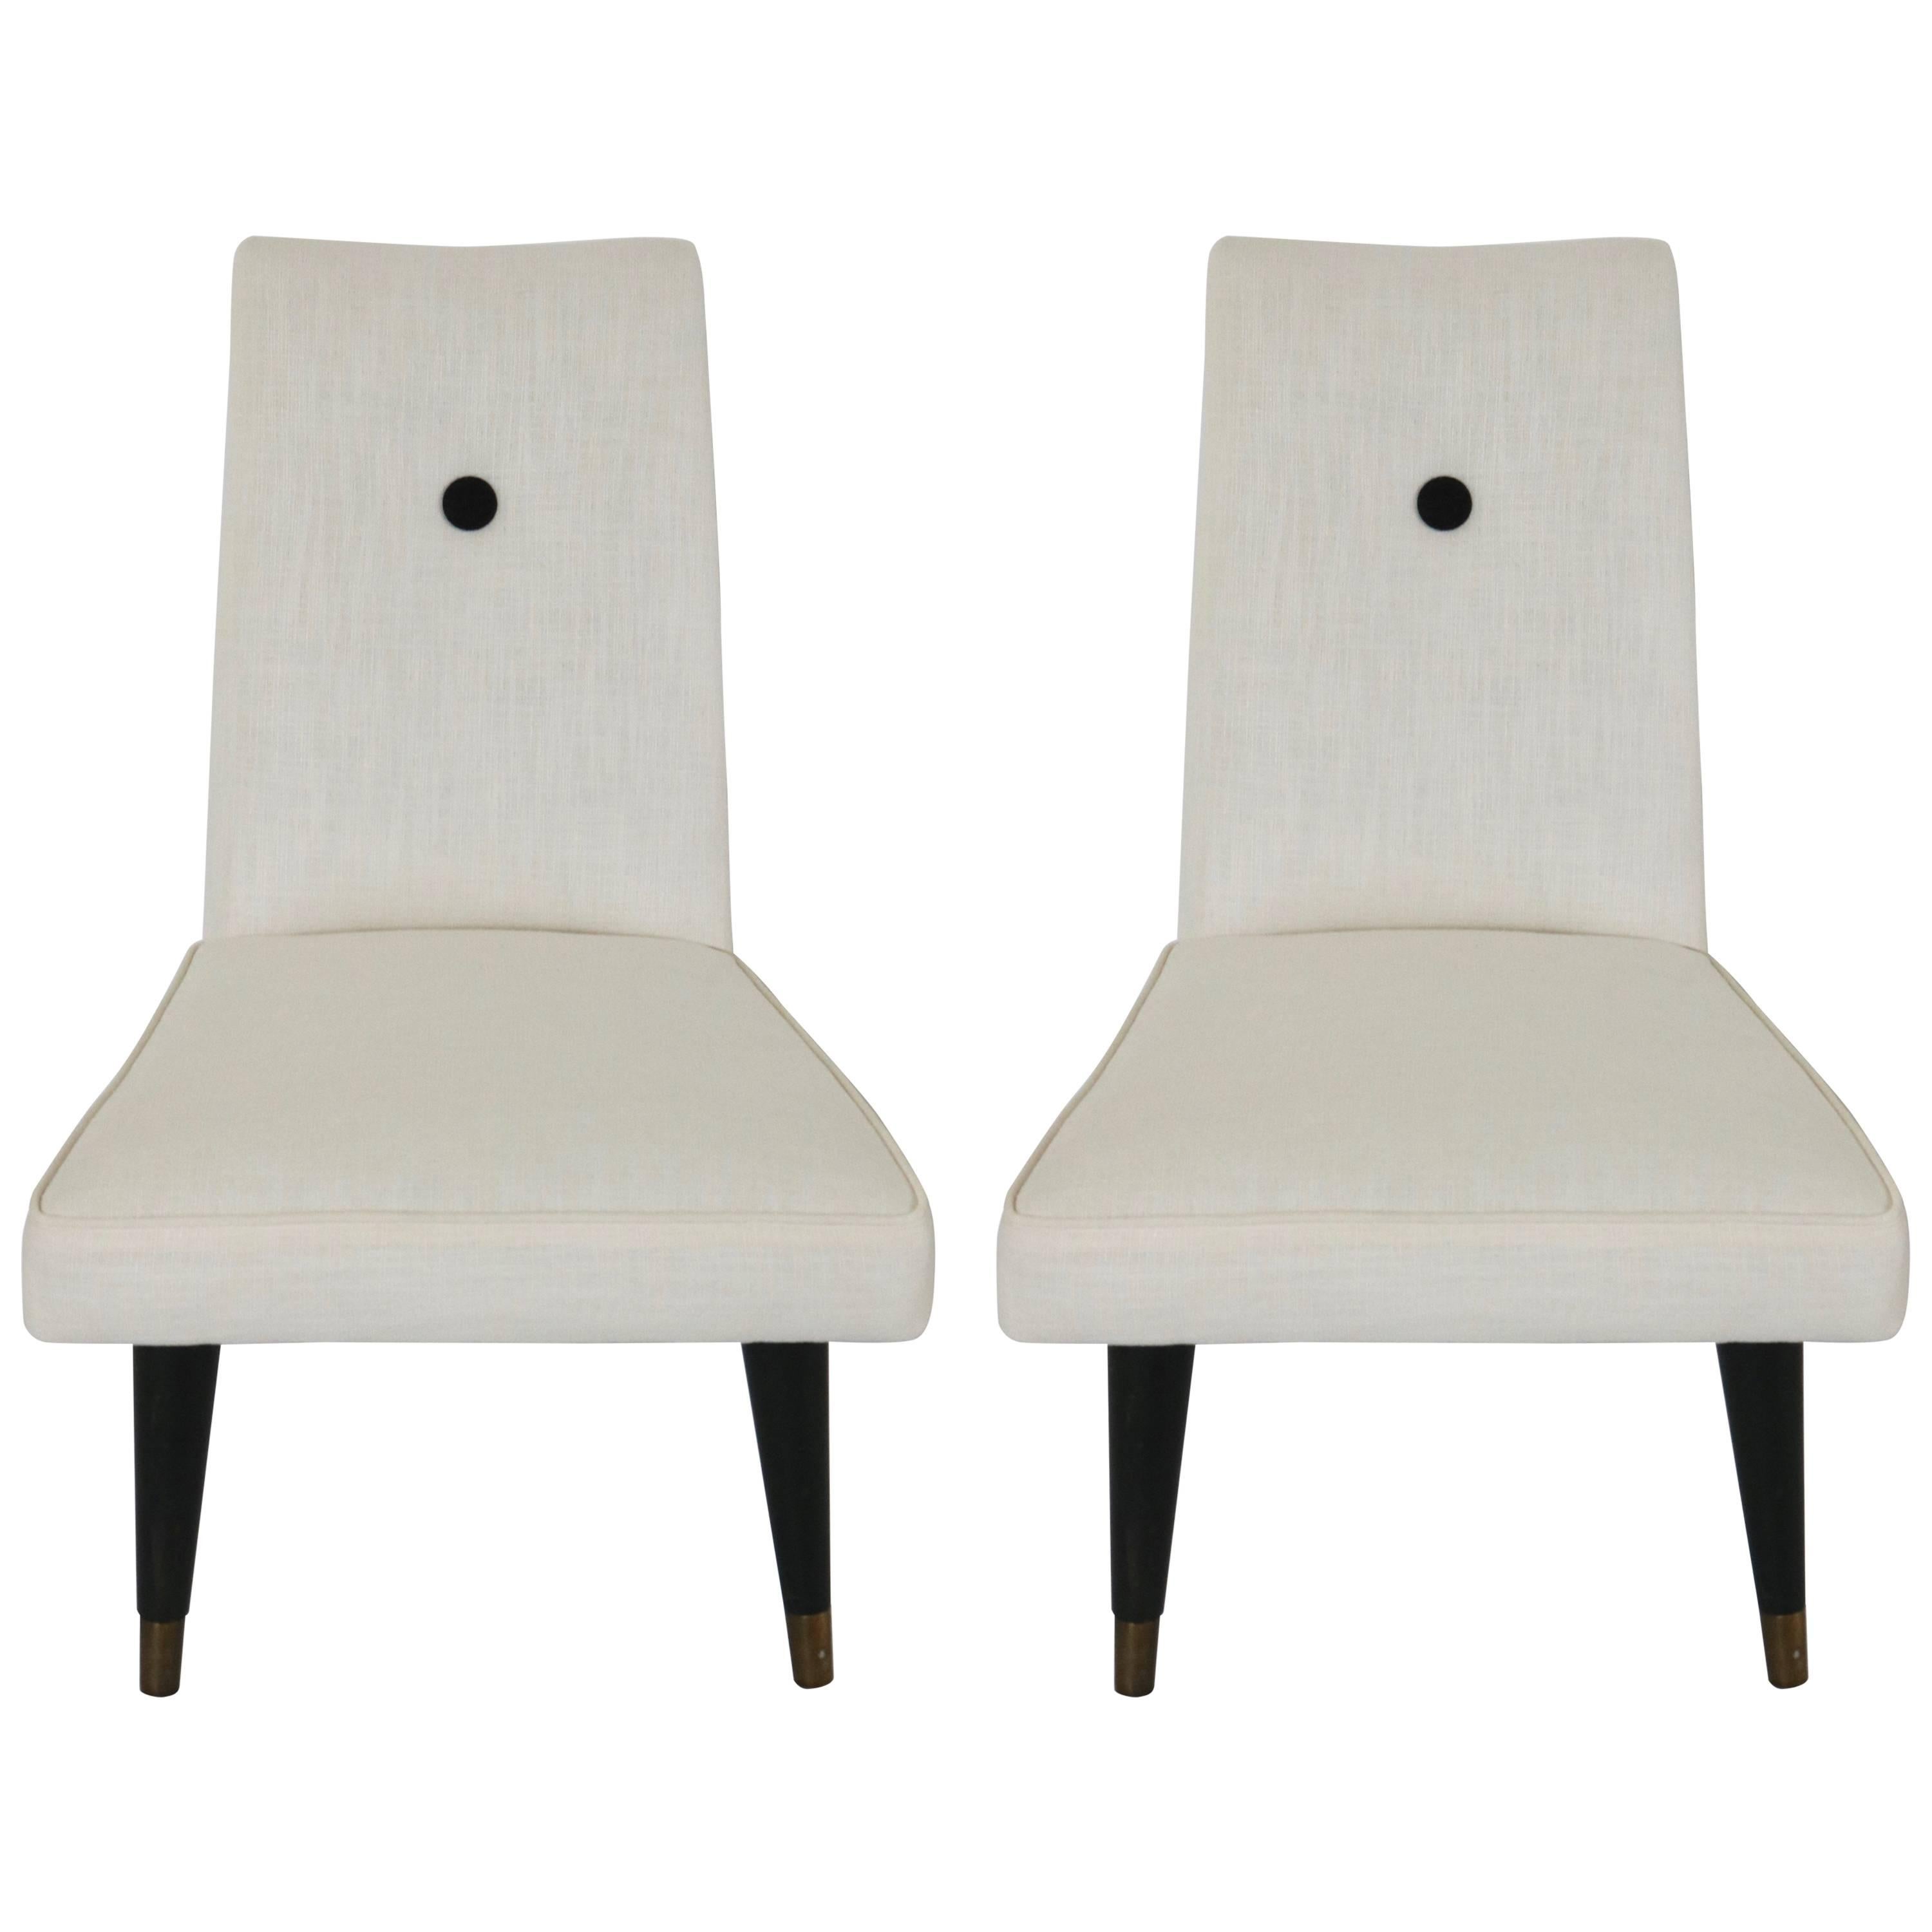 Pair of Mid-Century Modern Slipper Chairs in White and Black Upholstery